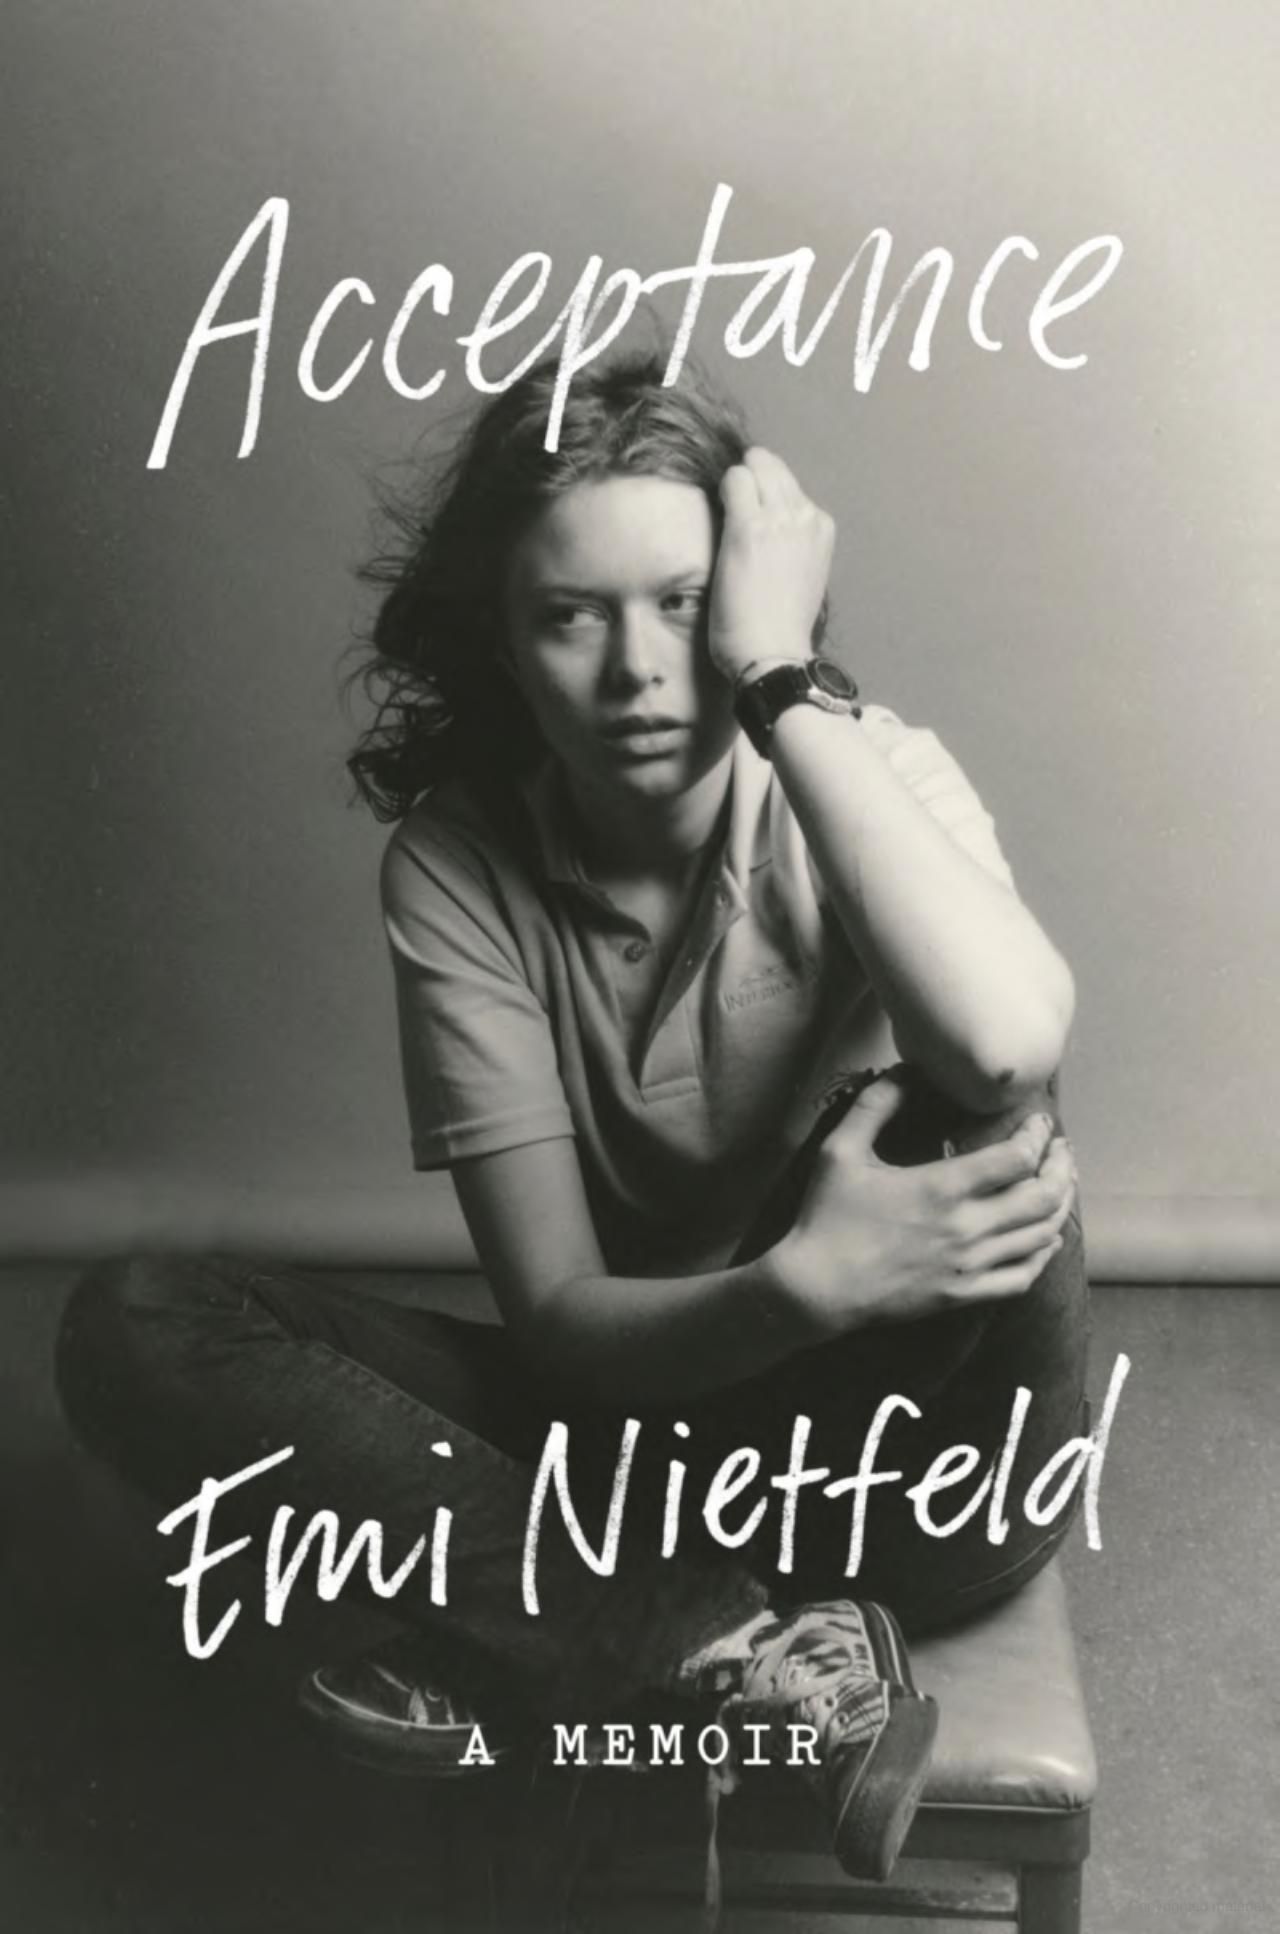 Hurt Just the Right Way: A Conversation with Emi Nietfeld